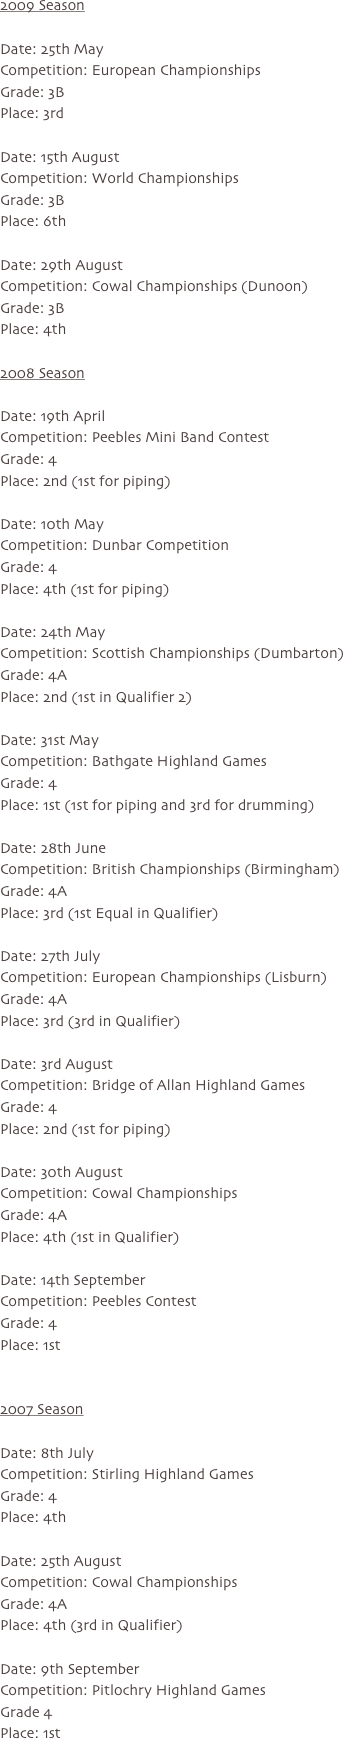 2009 Season

Date: 25th May
Competition: European Championships
Grade: 3B
Place: 3rd

Date: 15th August
Competition: World Championships
Grade: 3B
Place: 6th

Date: 29th August
Competition: Cowal Championships (Dunoon)
Grade: 3B
Place: 4th

2008 Season

Date: 19th April
Competition: Peebles Mini Band Contest
Grade: 4
Place: 2nd (1st for piping)

Date: 10th May
Competition: Dunbar Competition
Grade: 4
Place: 4th (1st for piping)

Date: 24th May
Competition: Scottish Championships (Dumbarton)
Grade: 4A
Place: 2nd (1st in Qualifier 2)

Date: 31st May
Competition: Bathgate Highland Games
Grade: 4
Place: 1st (1st for piping and 3rd for drumming)

Date: 28th June
Competition: British Championships (Birmingham)
Grade: 4A
Place: 3rd (1st Equal in Qualifier)

Date: 27th July
Competition: European Championships (Lisburn)
Grade: 4A
Place: 3rd (3rd in Qualifier)

Date: 3rd August
Competition: Bridge of Allan Highland Games
Grade: 4
Place: 2nd (1st for piping)

Date: 30th August
Competition: Cowal Championships
Grade: 4A
Place: 4th (1st in Qualifier)

Date: 14th September
Competition: Peebles Contest
Grade: 4
Place: 1st


2007 Season

Date: 8th July
Competition: Stirling Highland Games
Grade: 4
Place: 4th

Date: 25th August
Competition: Cowal Championships
Grade: 4A
Place: 4th (3rd in Qualifier)

Date: 9th September
Competition: Pitlochry Highland Games
Grade 4
Place: 1st